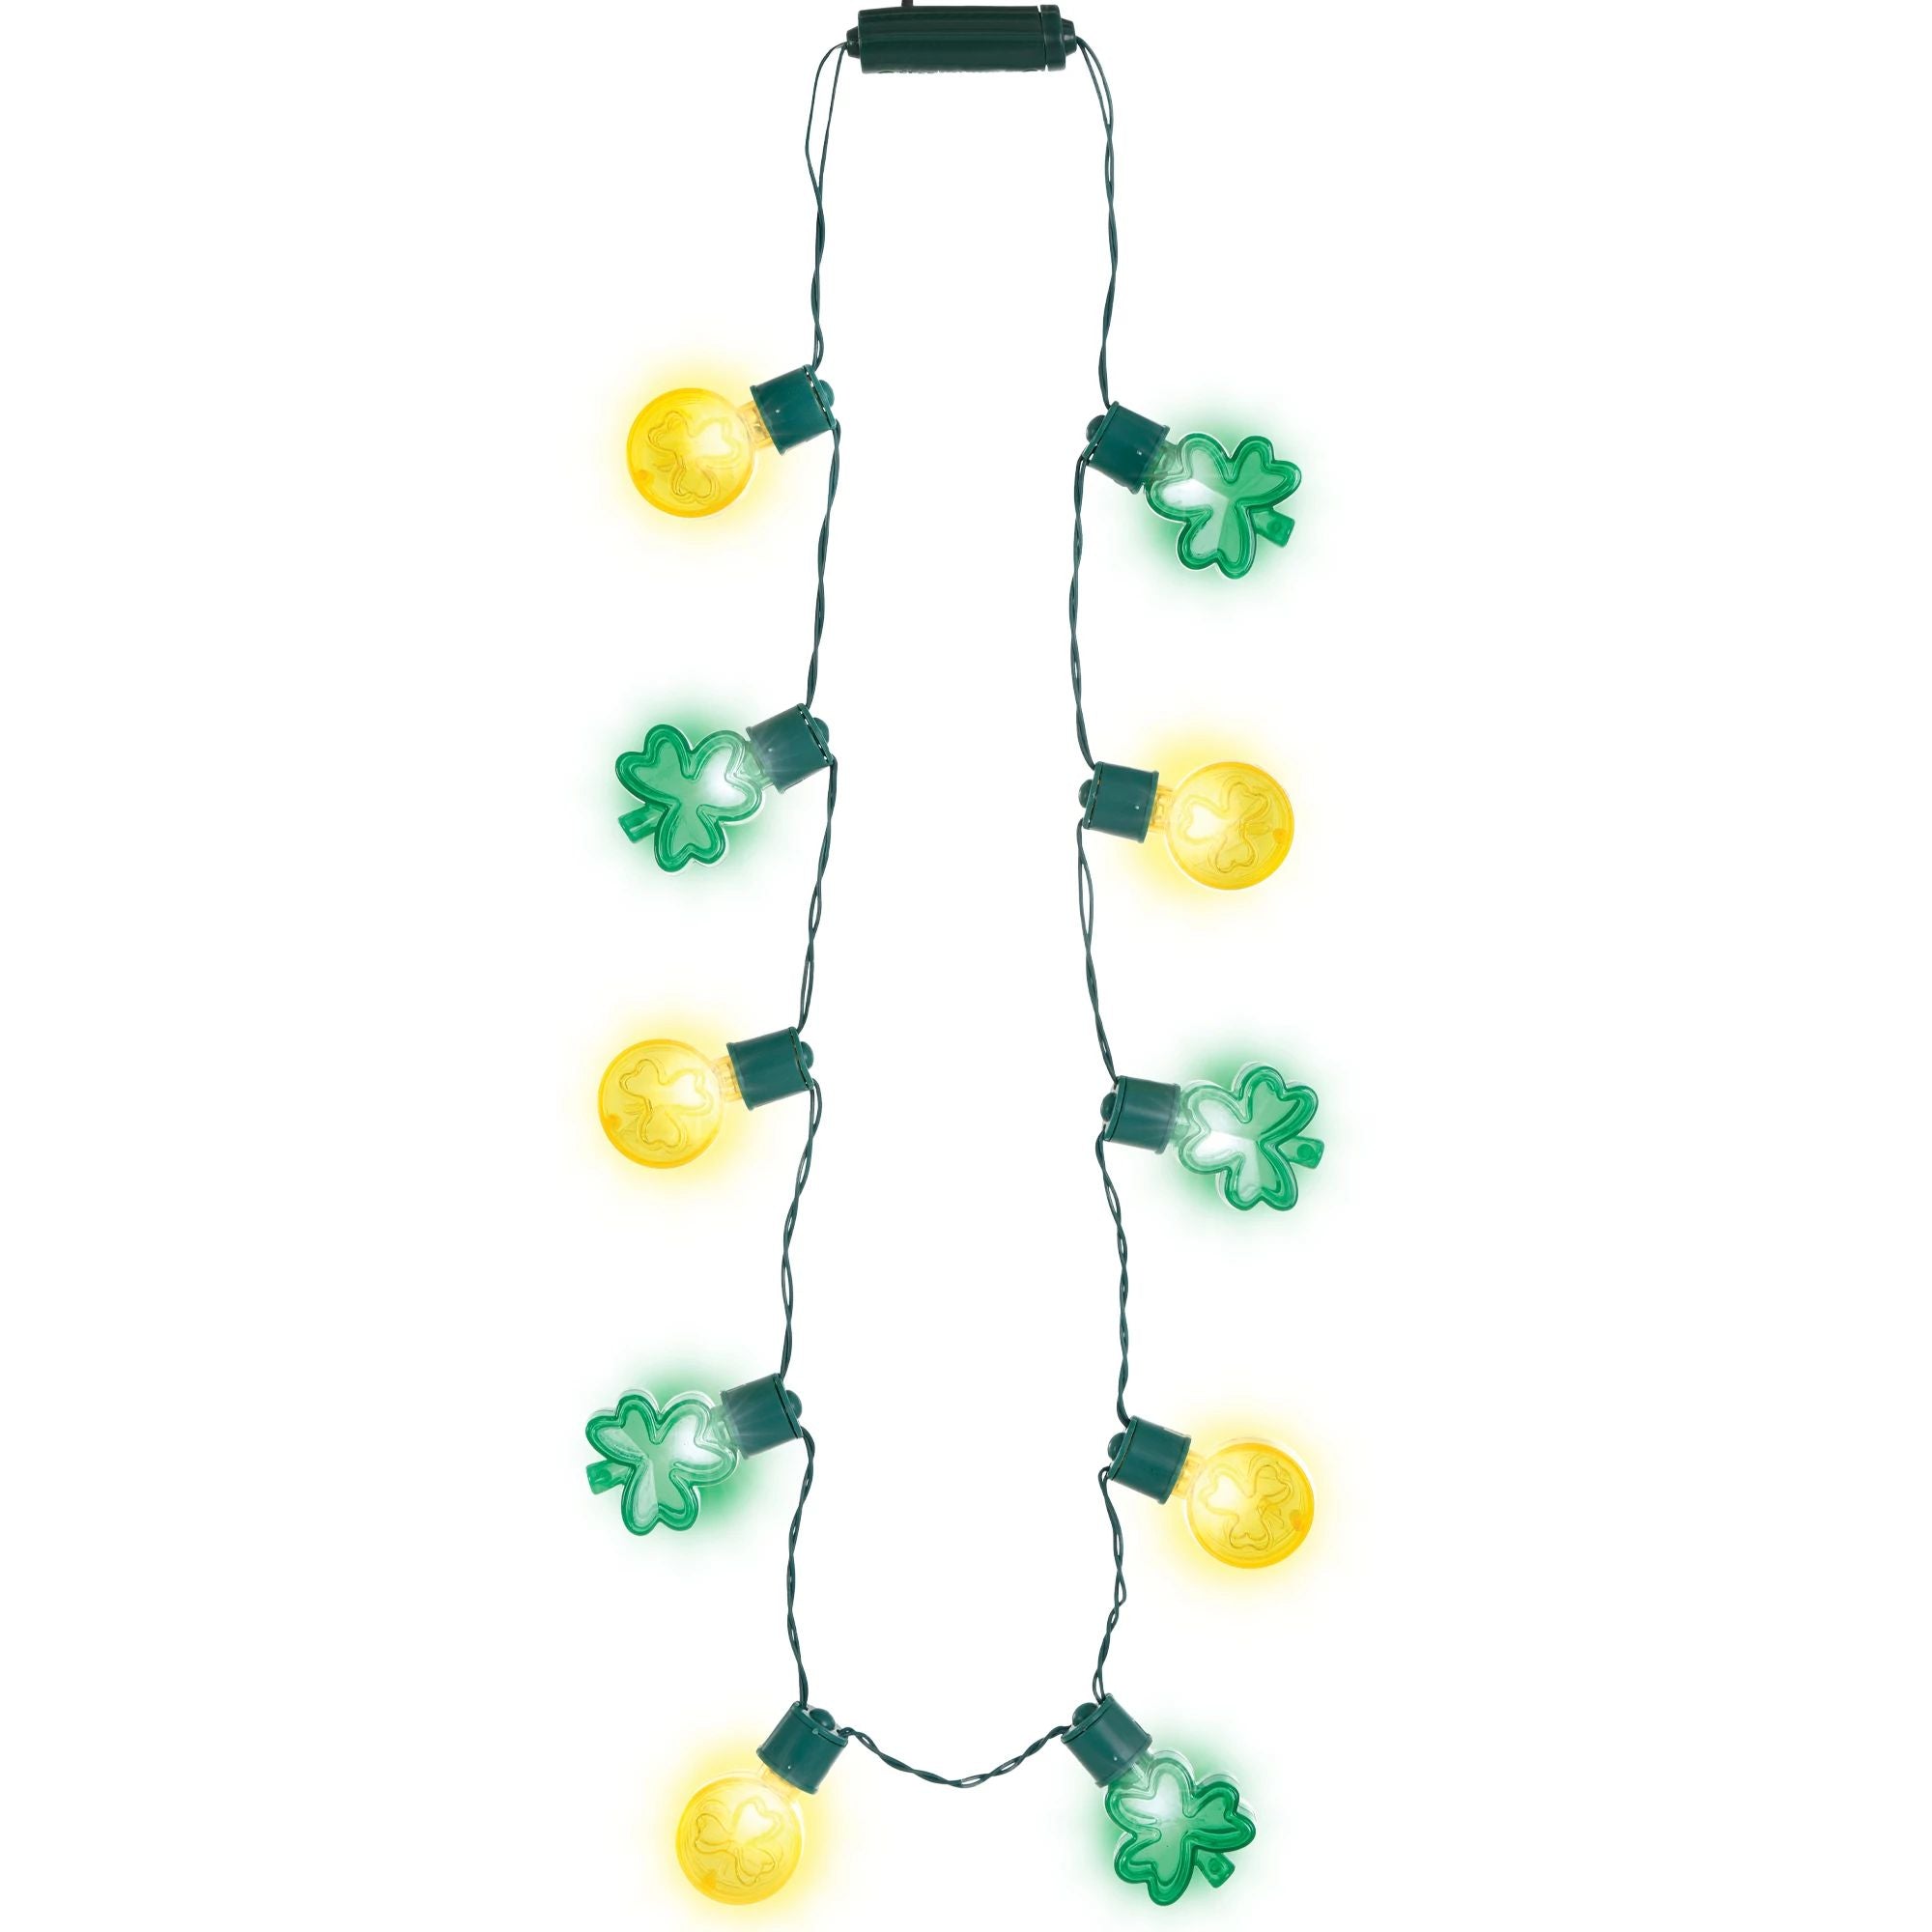 Amscan HOLIDAY: ST. PAT'S Shamrock & Coin Light Up Jumbo Necklace